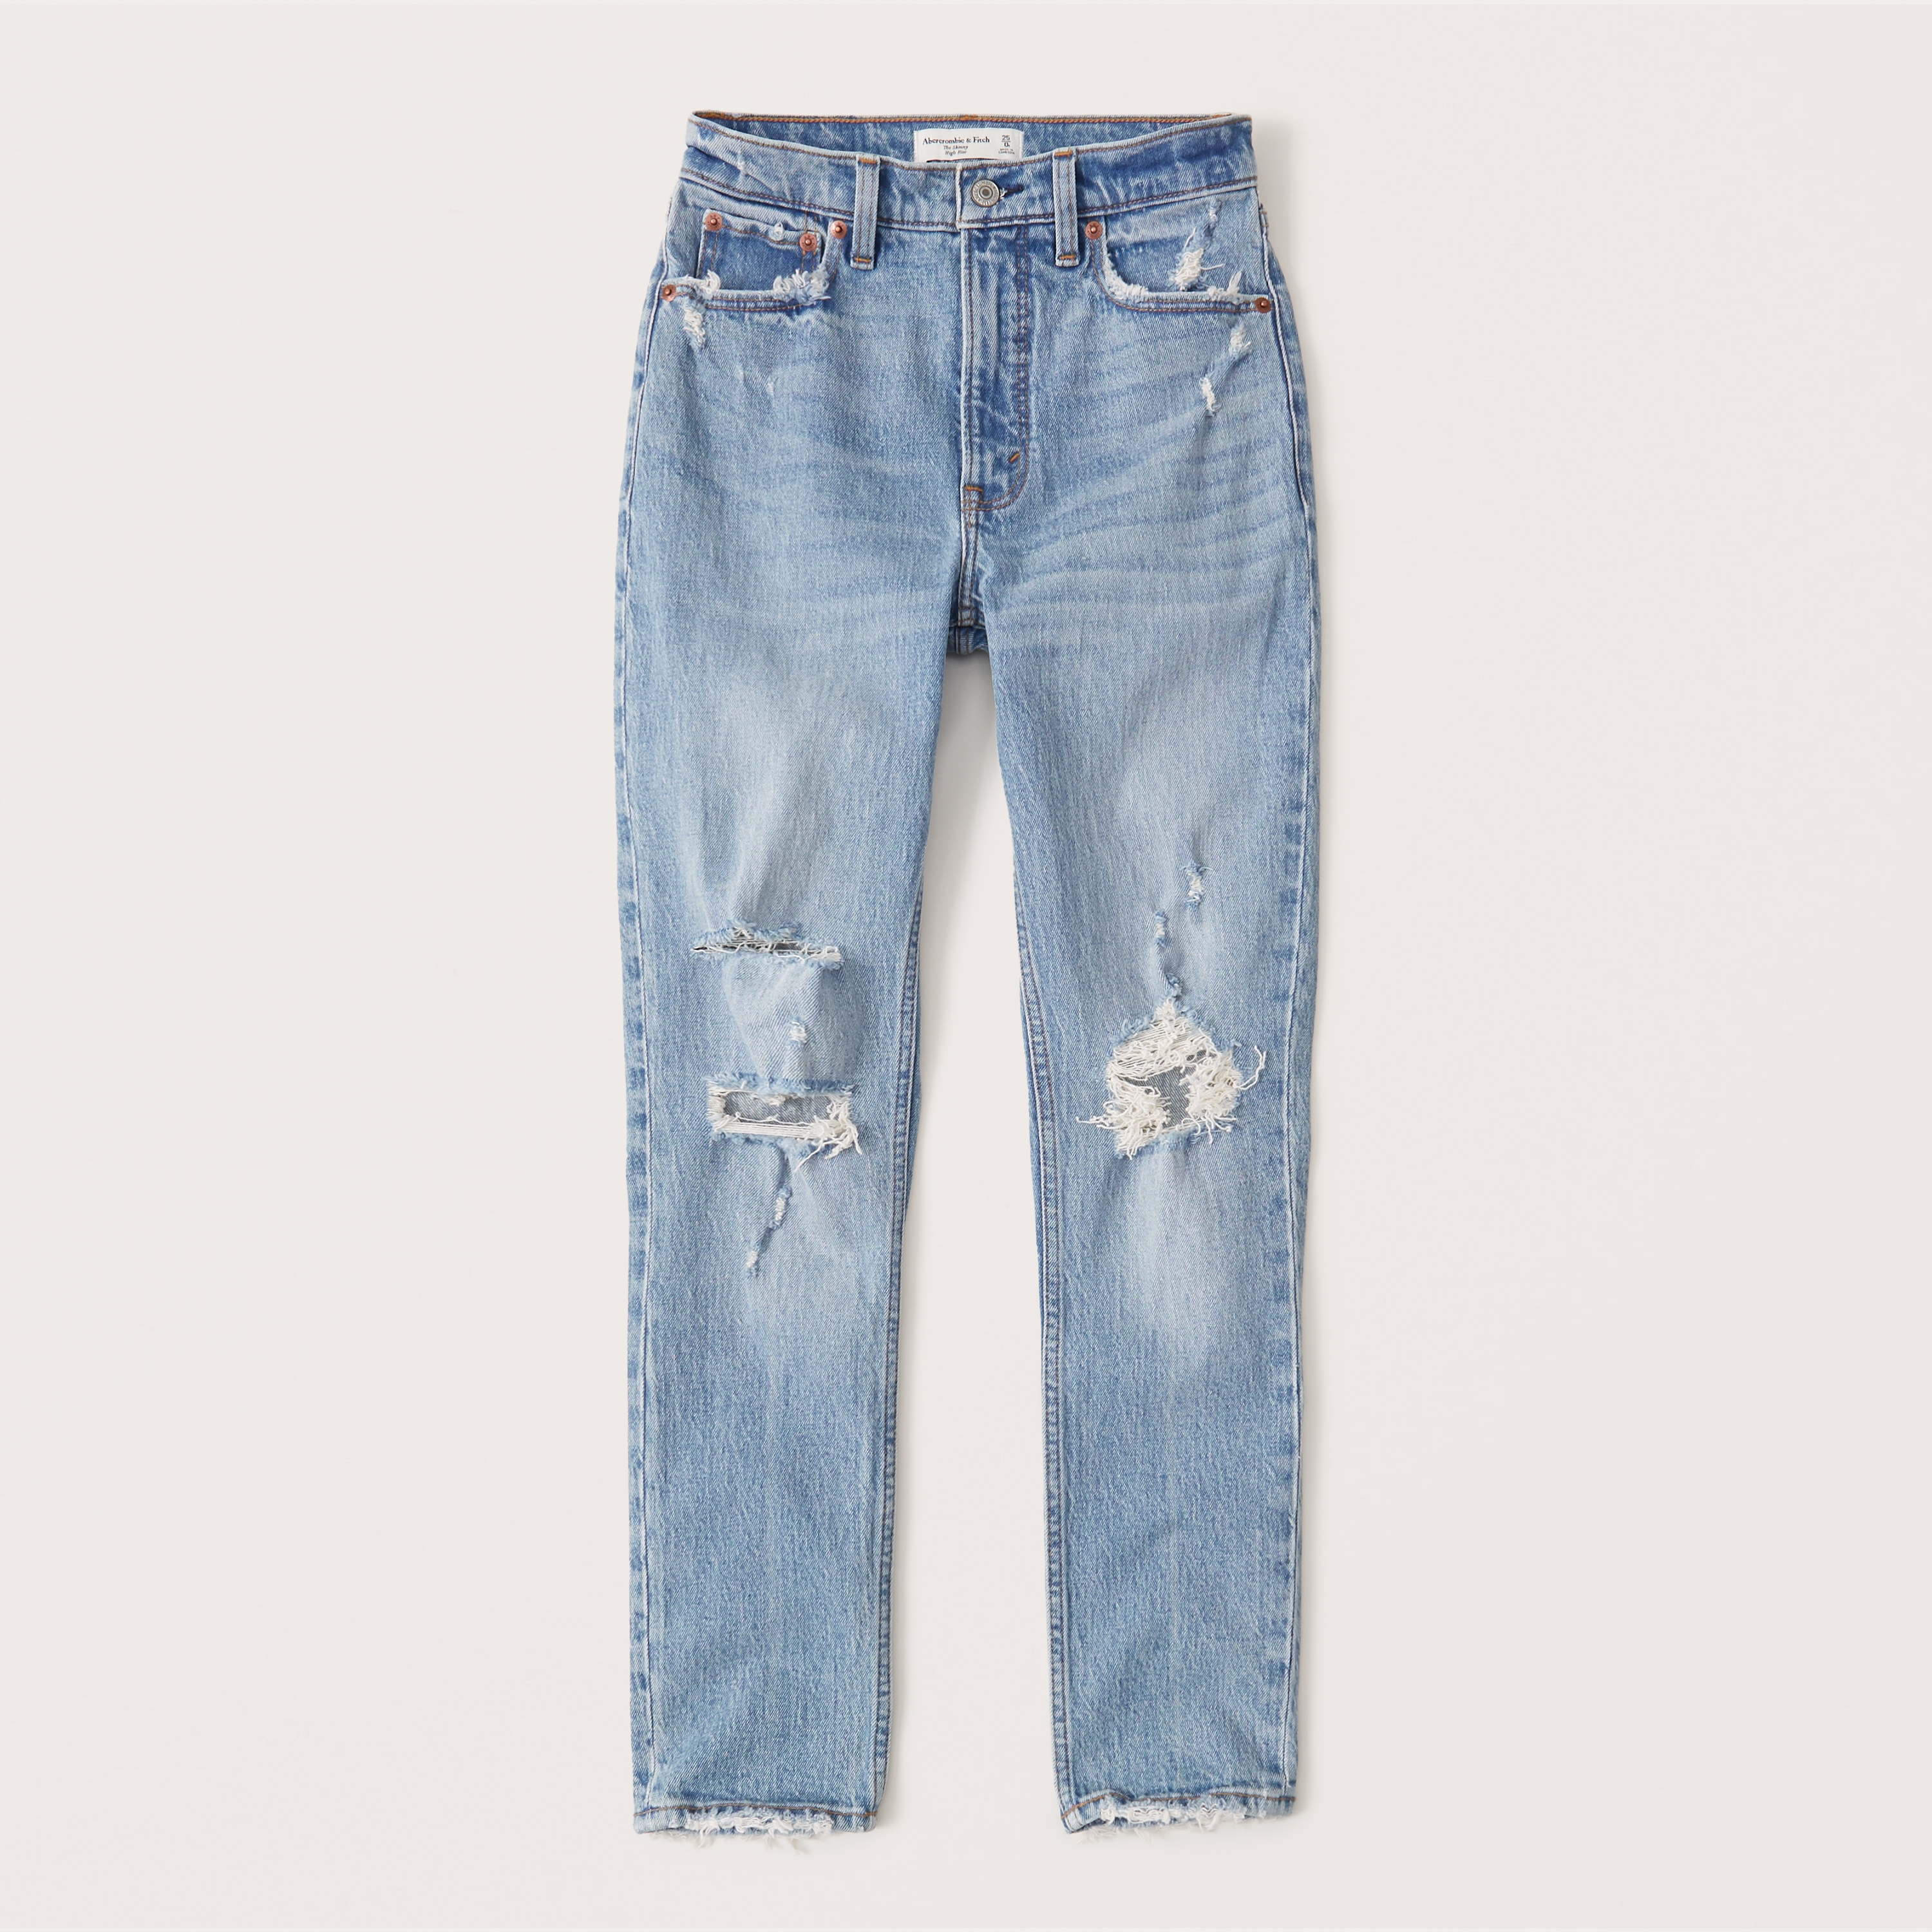 abercrombie & fitch jeans